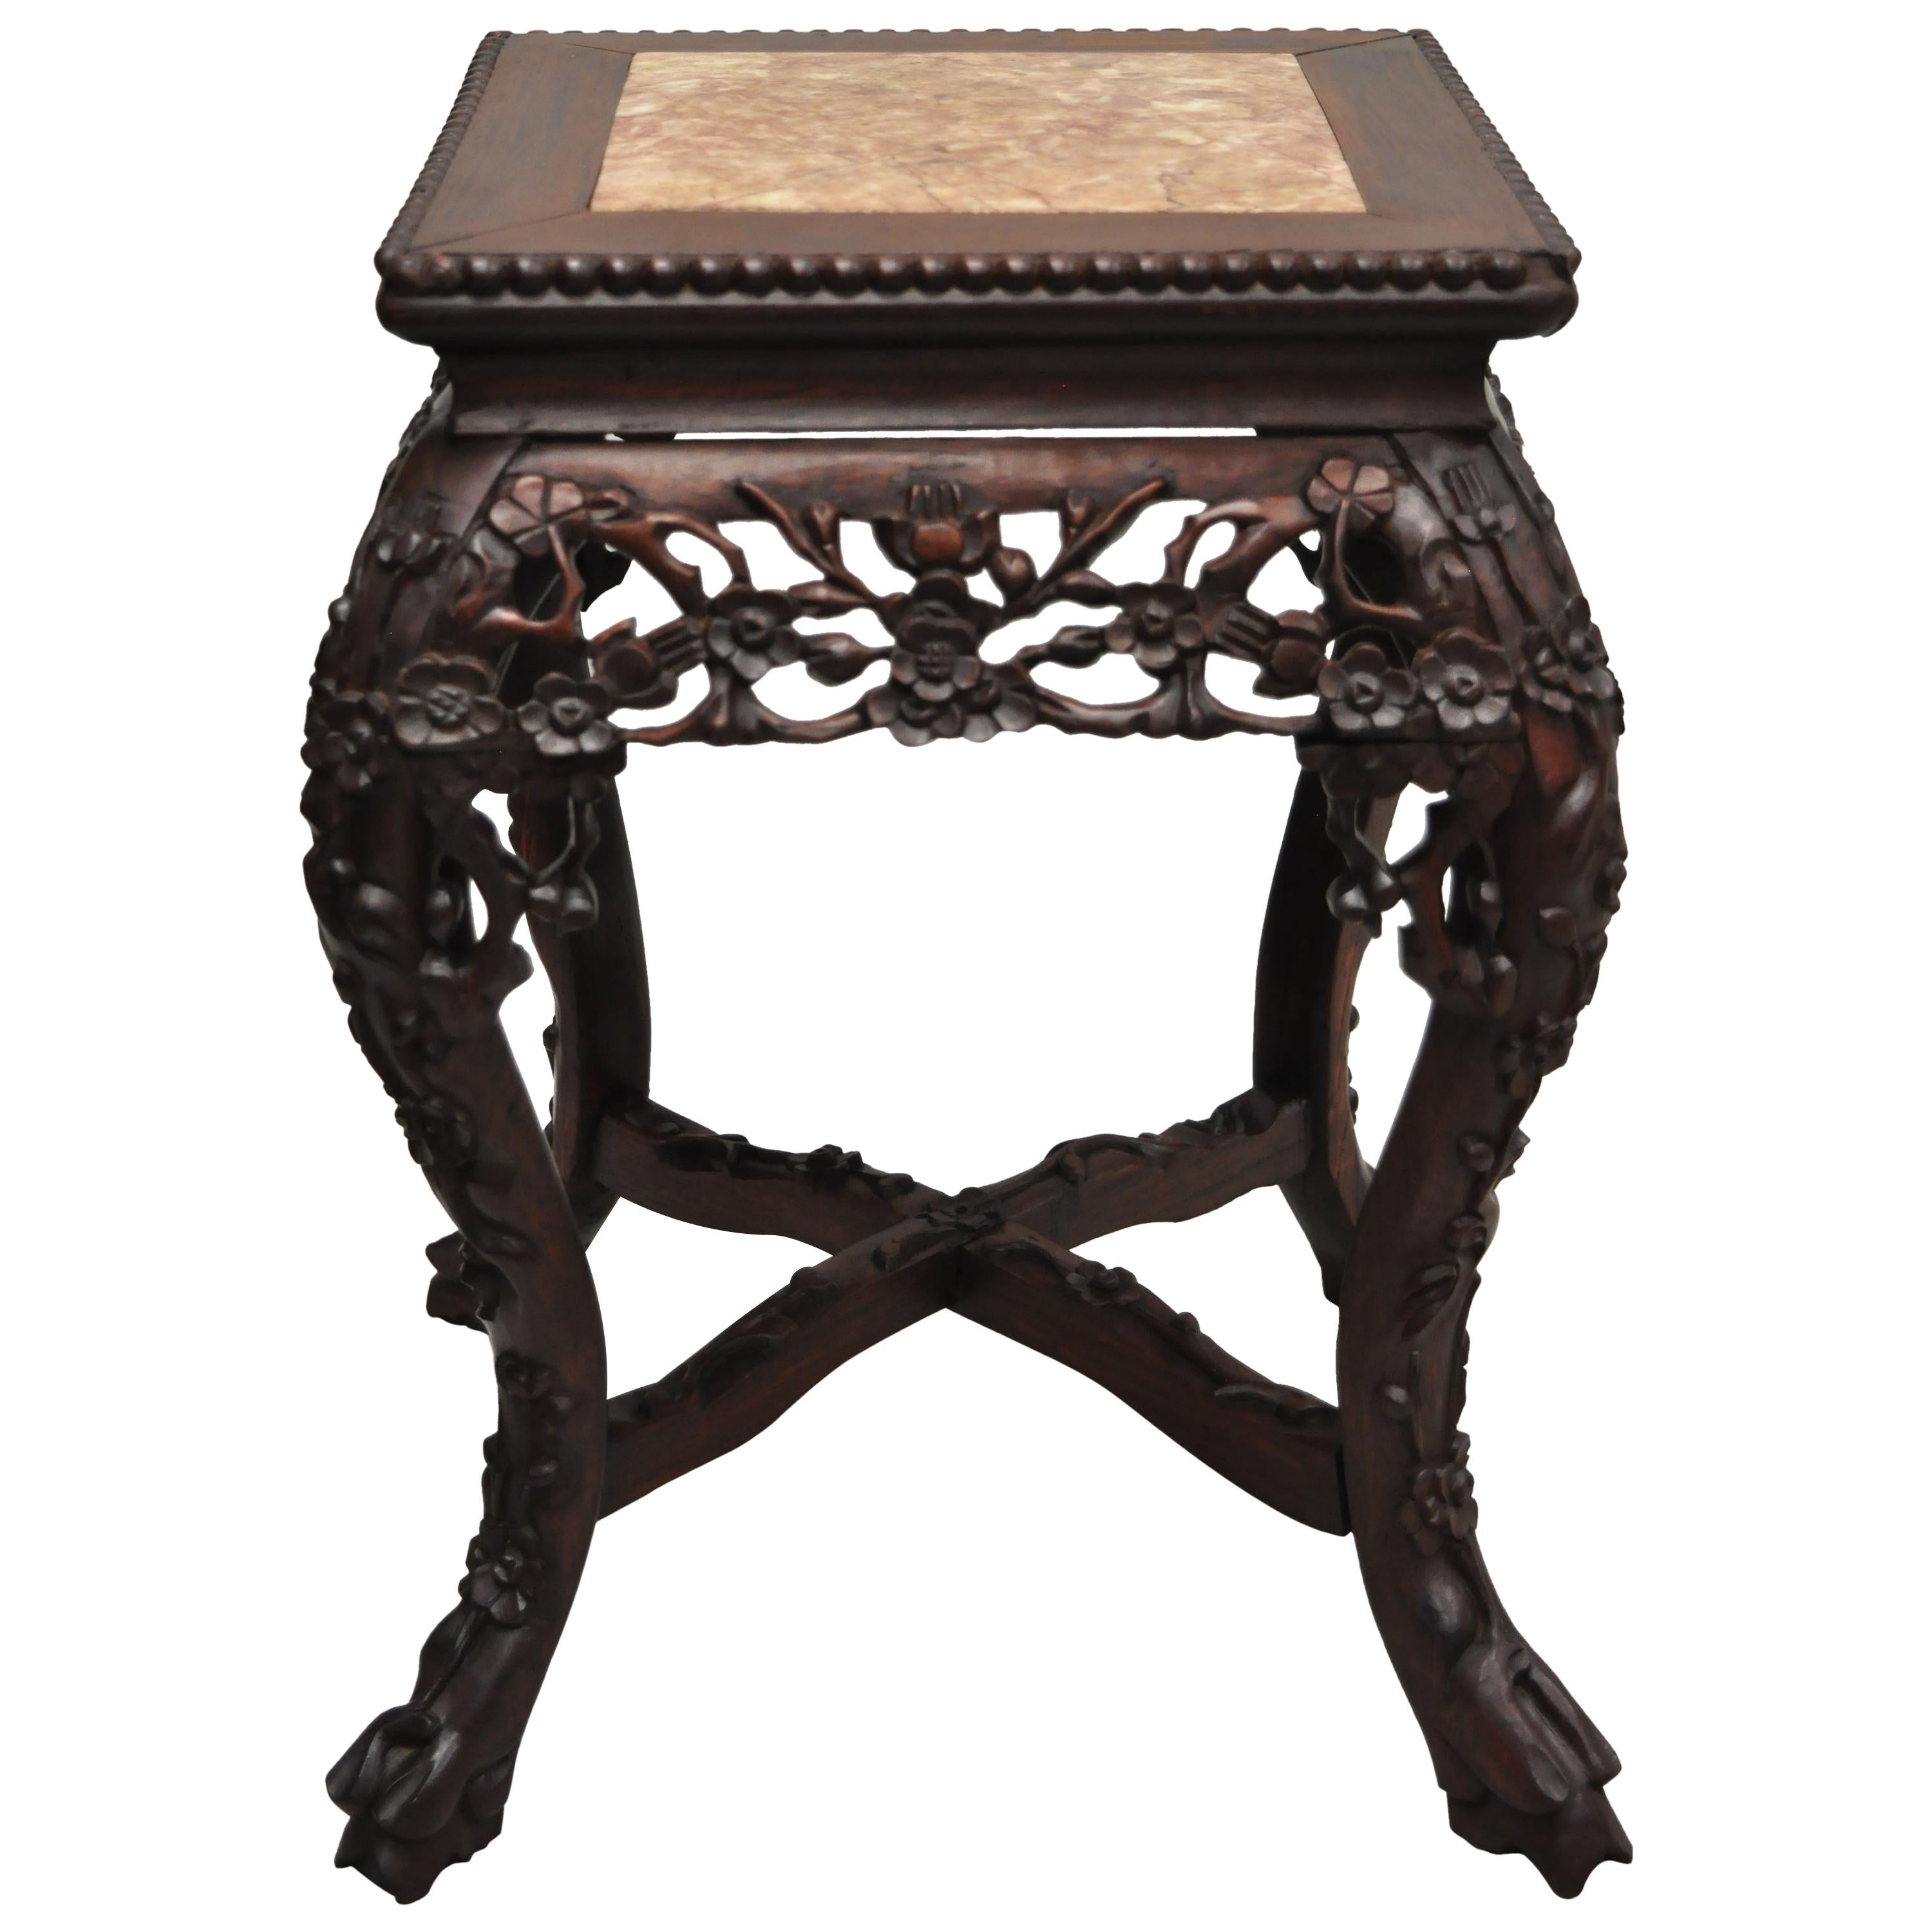 Antique Carved Hardwood Rosewood Marble-Top Chinese Pedestal Table Plant Stand D